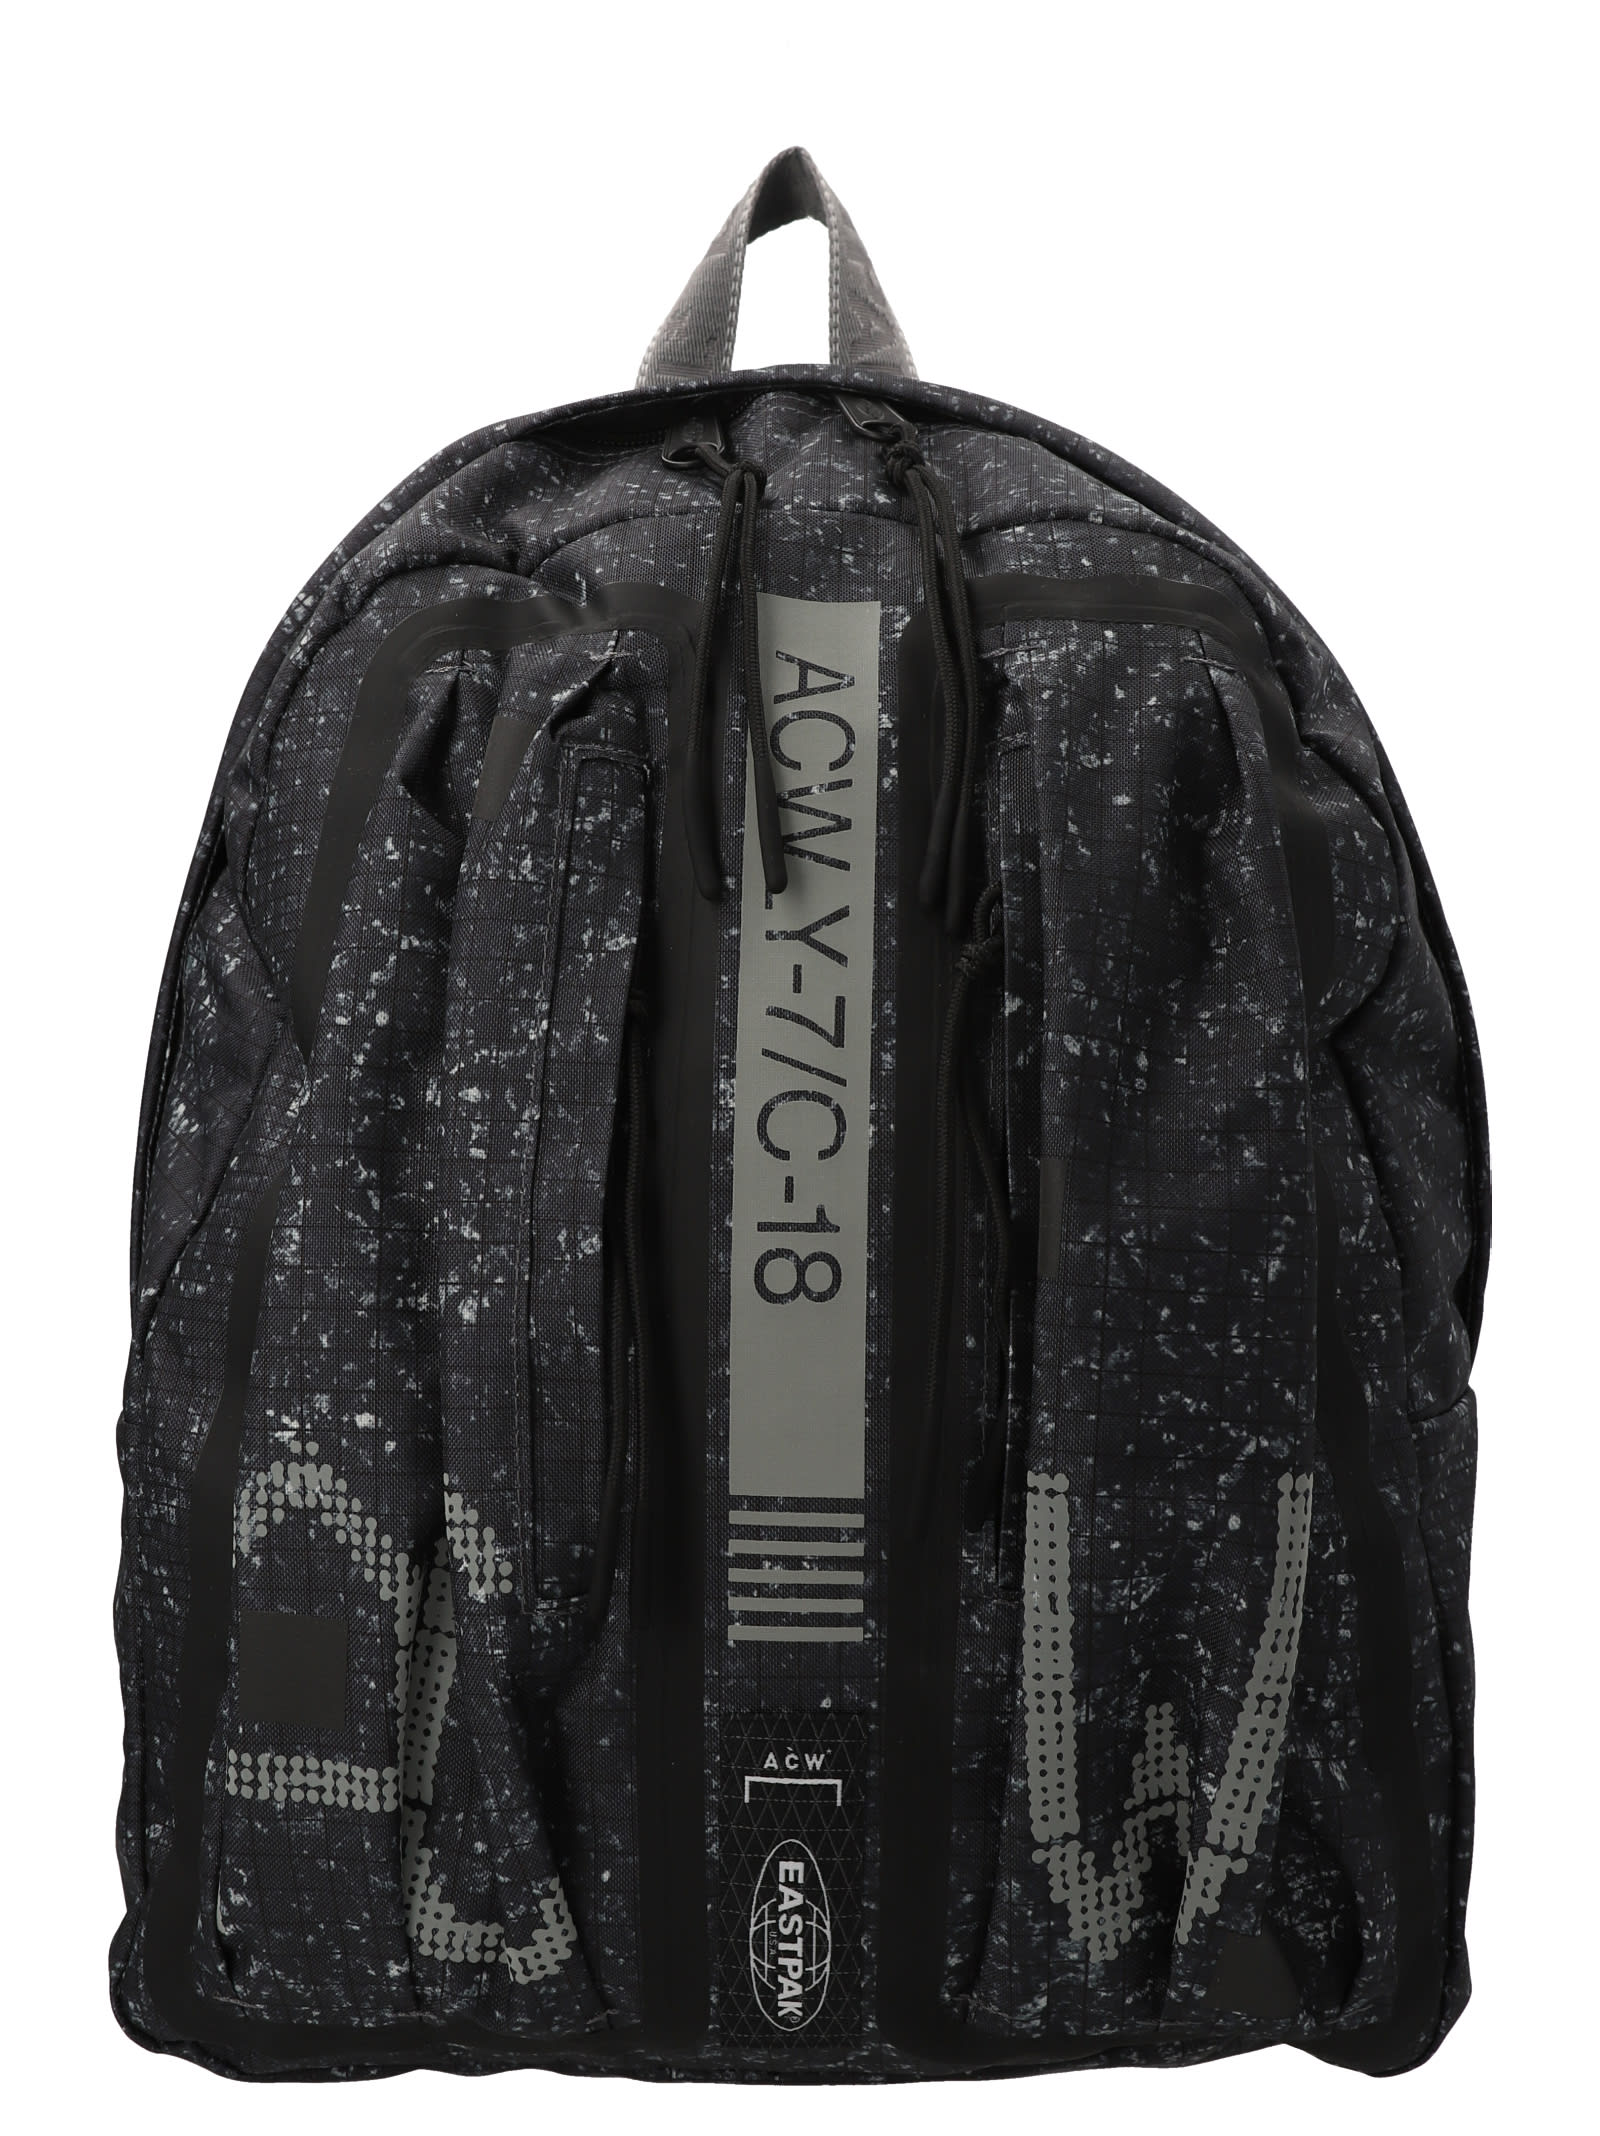 A-COLD-WALL A-cold-wall* X Eastpak padded Backpack